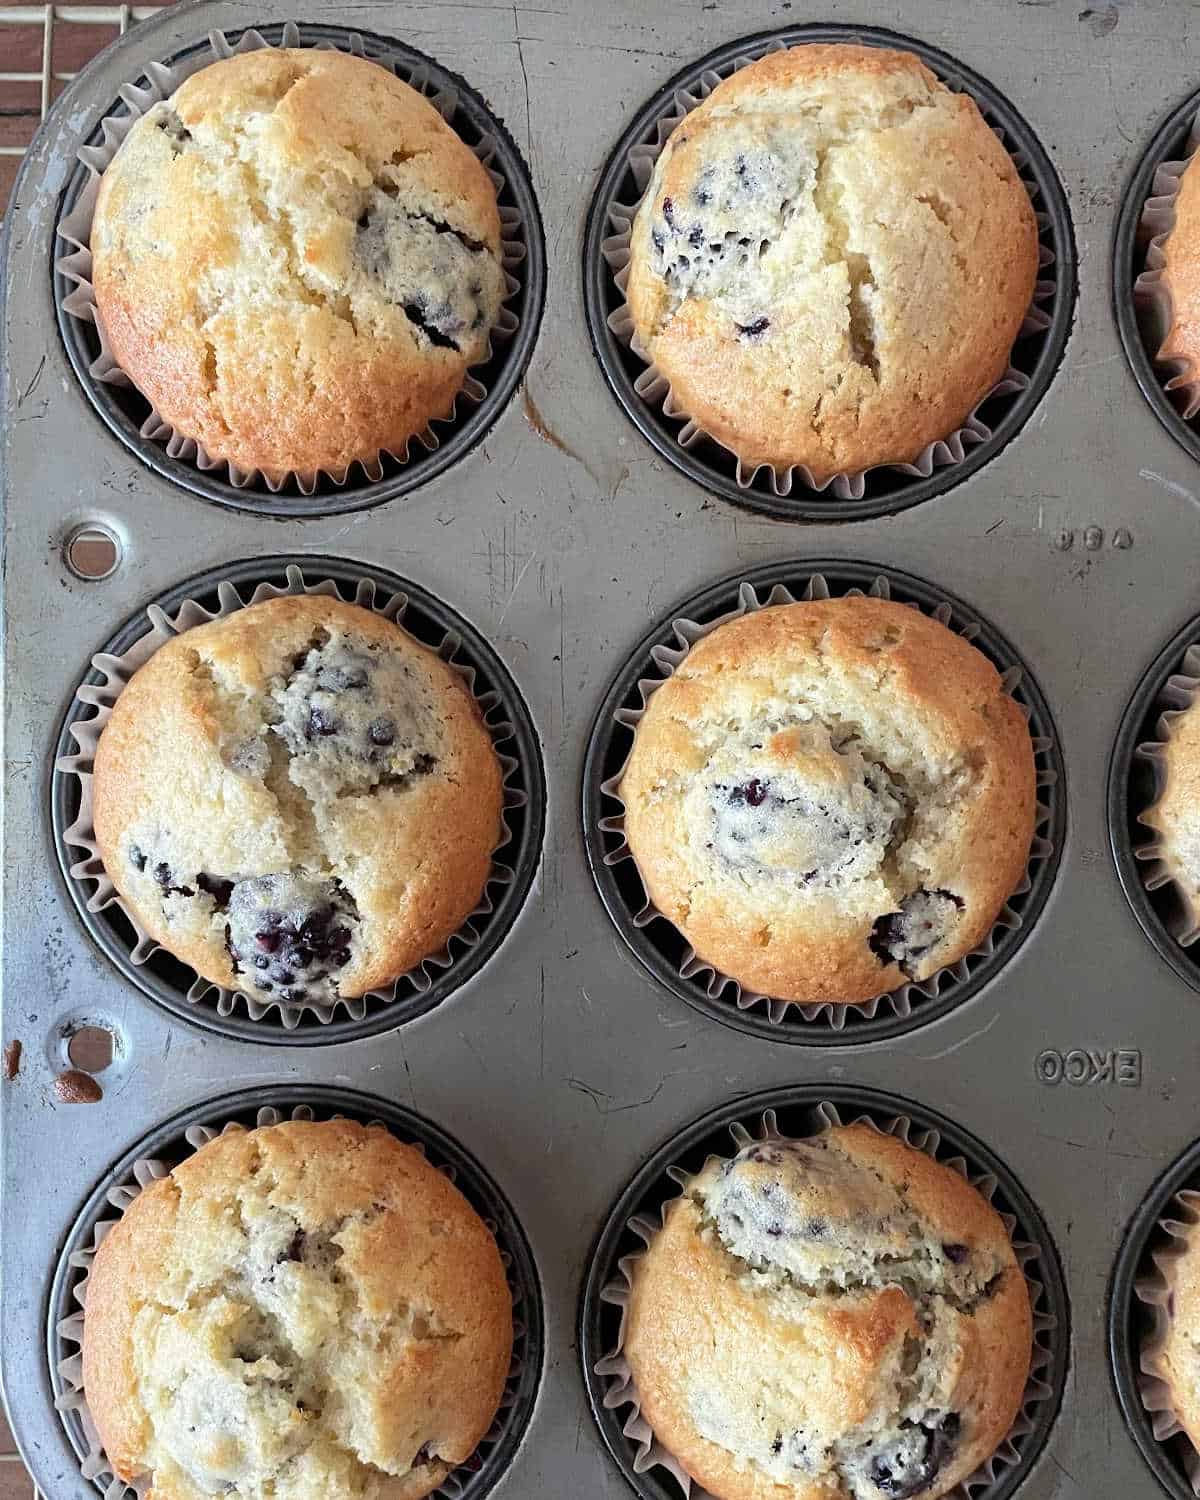 Baked blackberry muffins in the metal pan. Close up image.